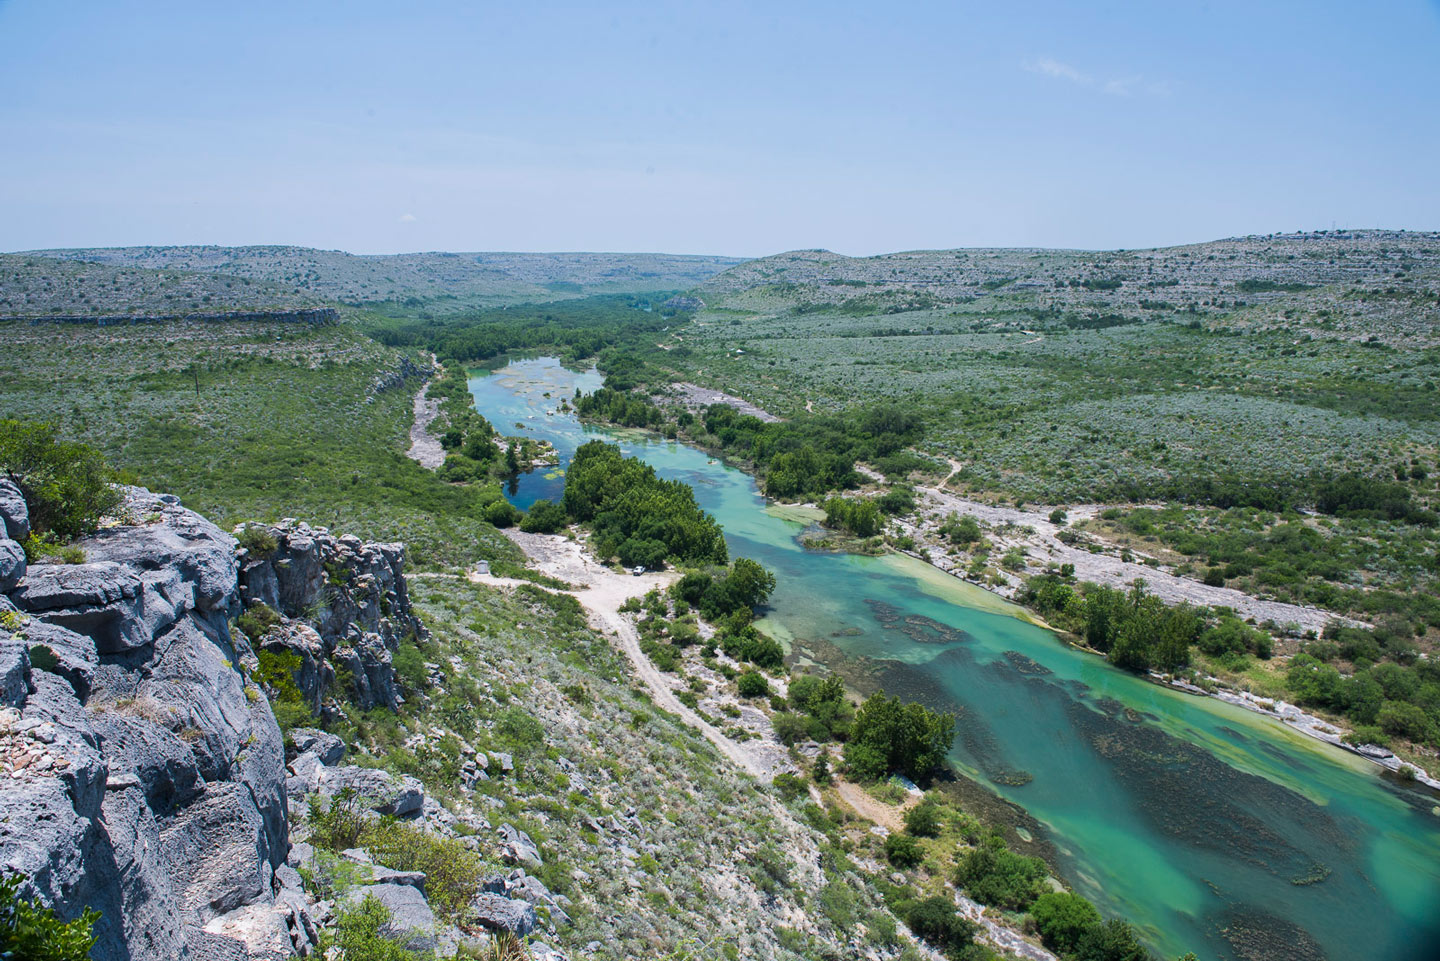 Overlooking the Devils River in Devils River State Natural Area